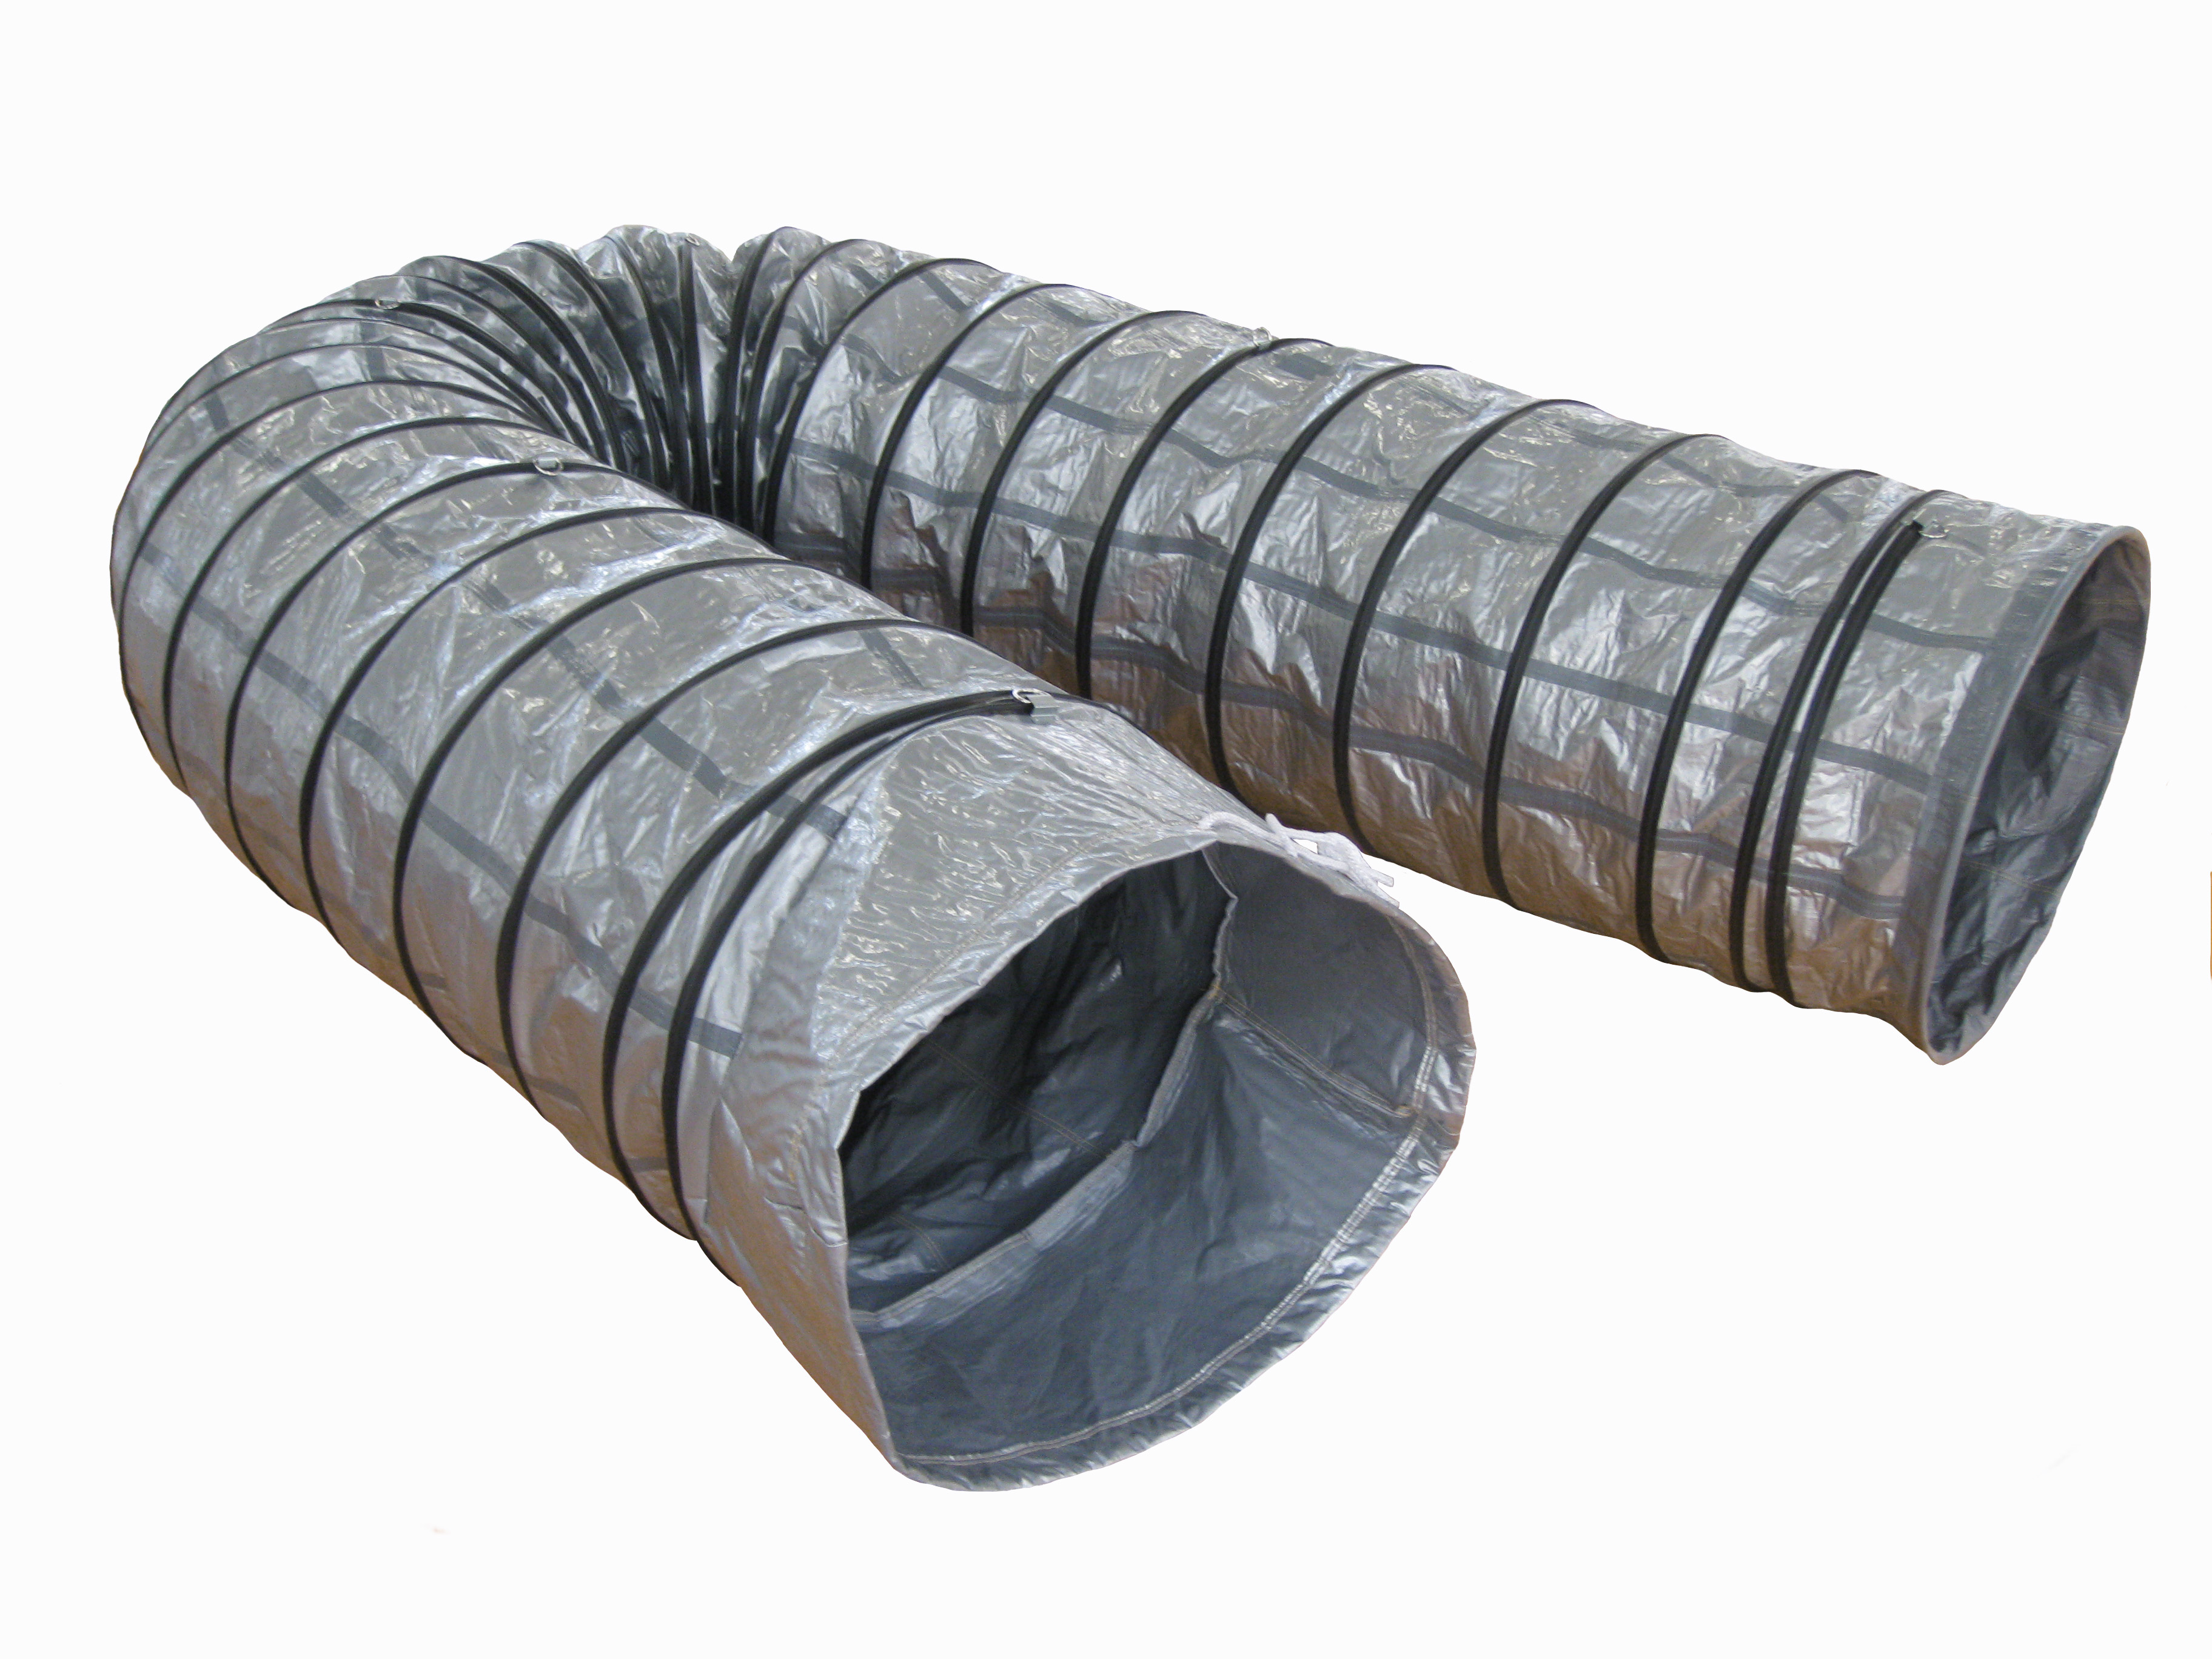 Exhibition center/central air-conditioning insulated hose